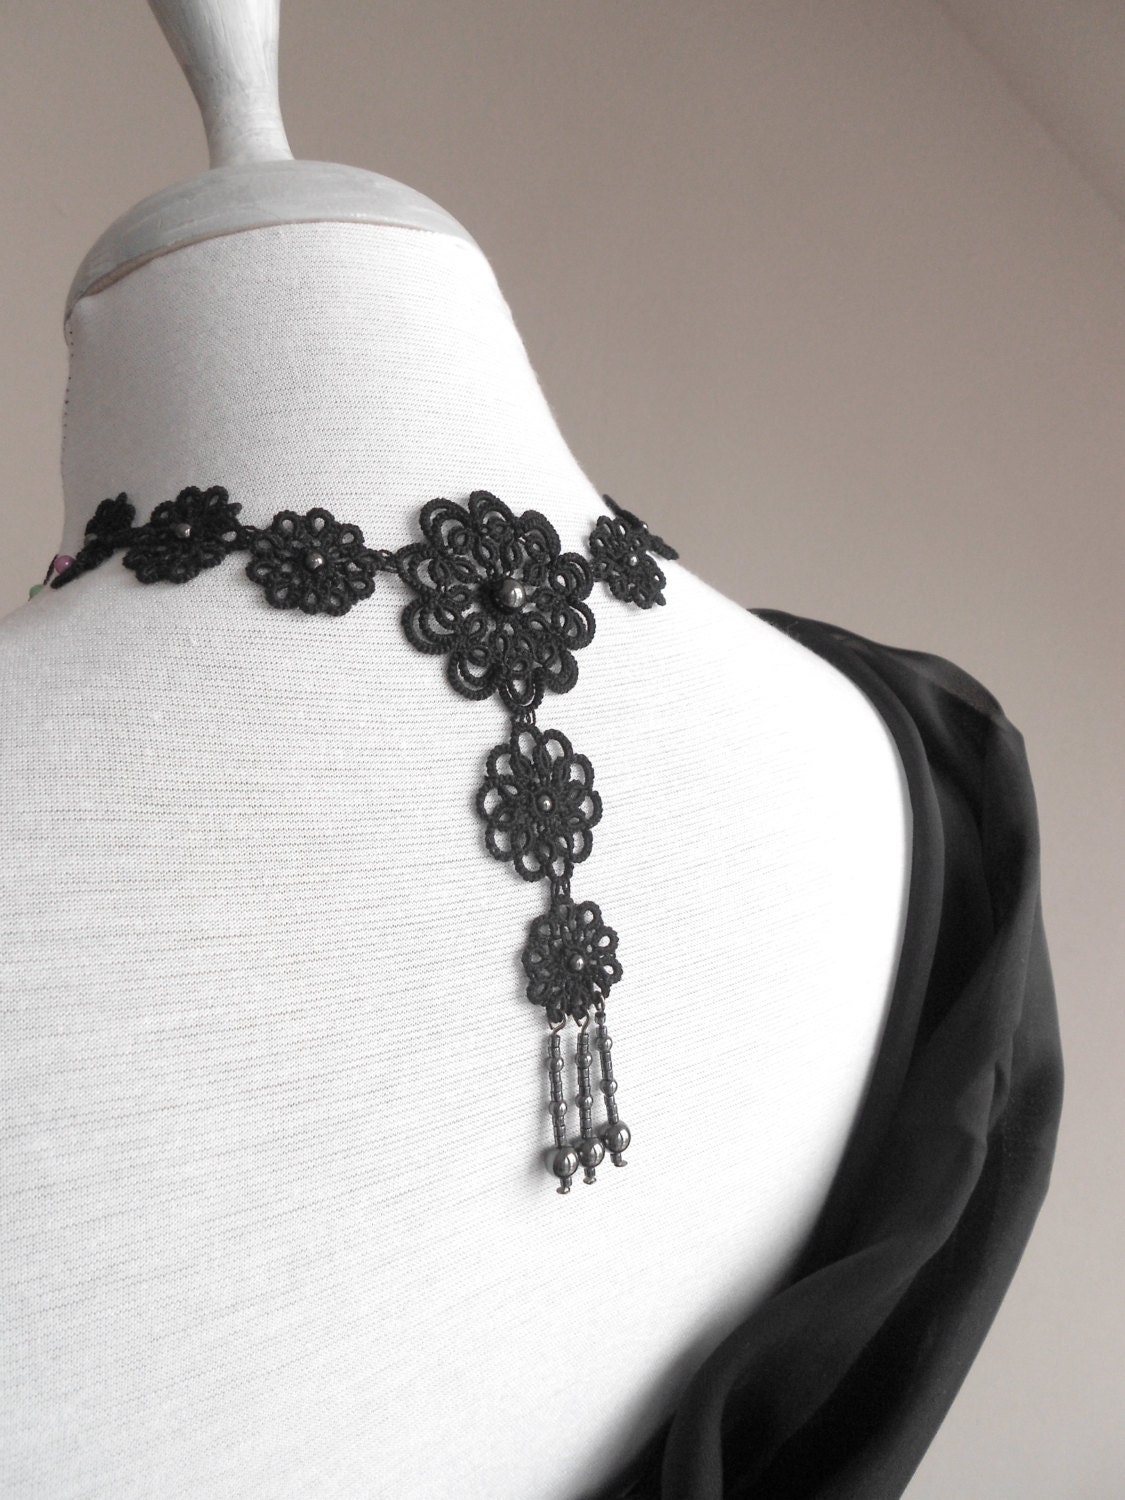 Black floral lace necklace, evening, party, tatted, elegant